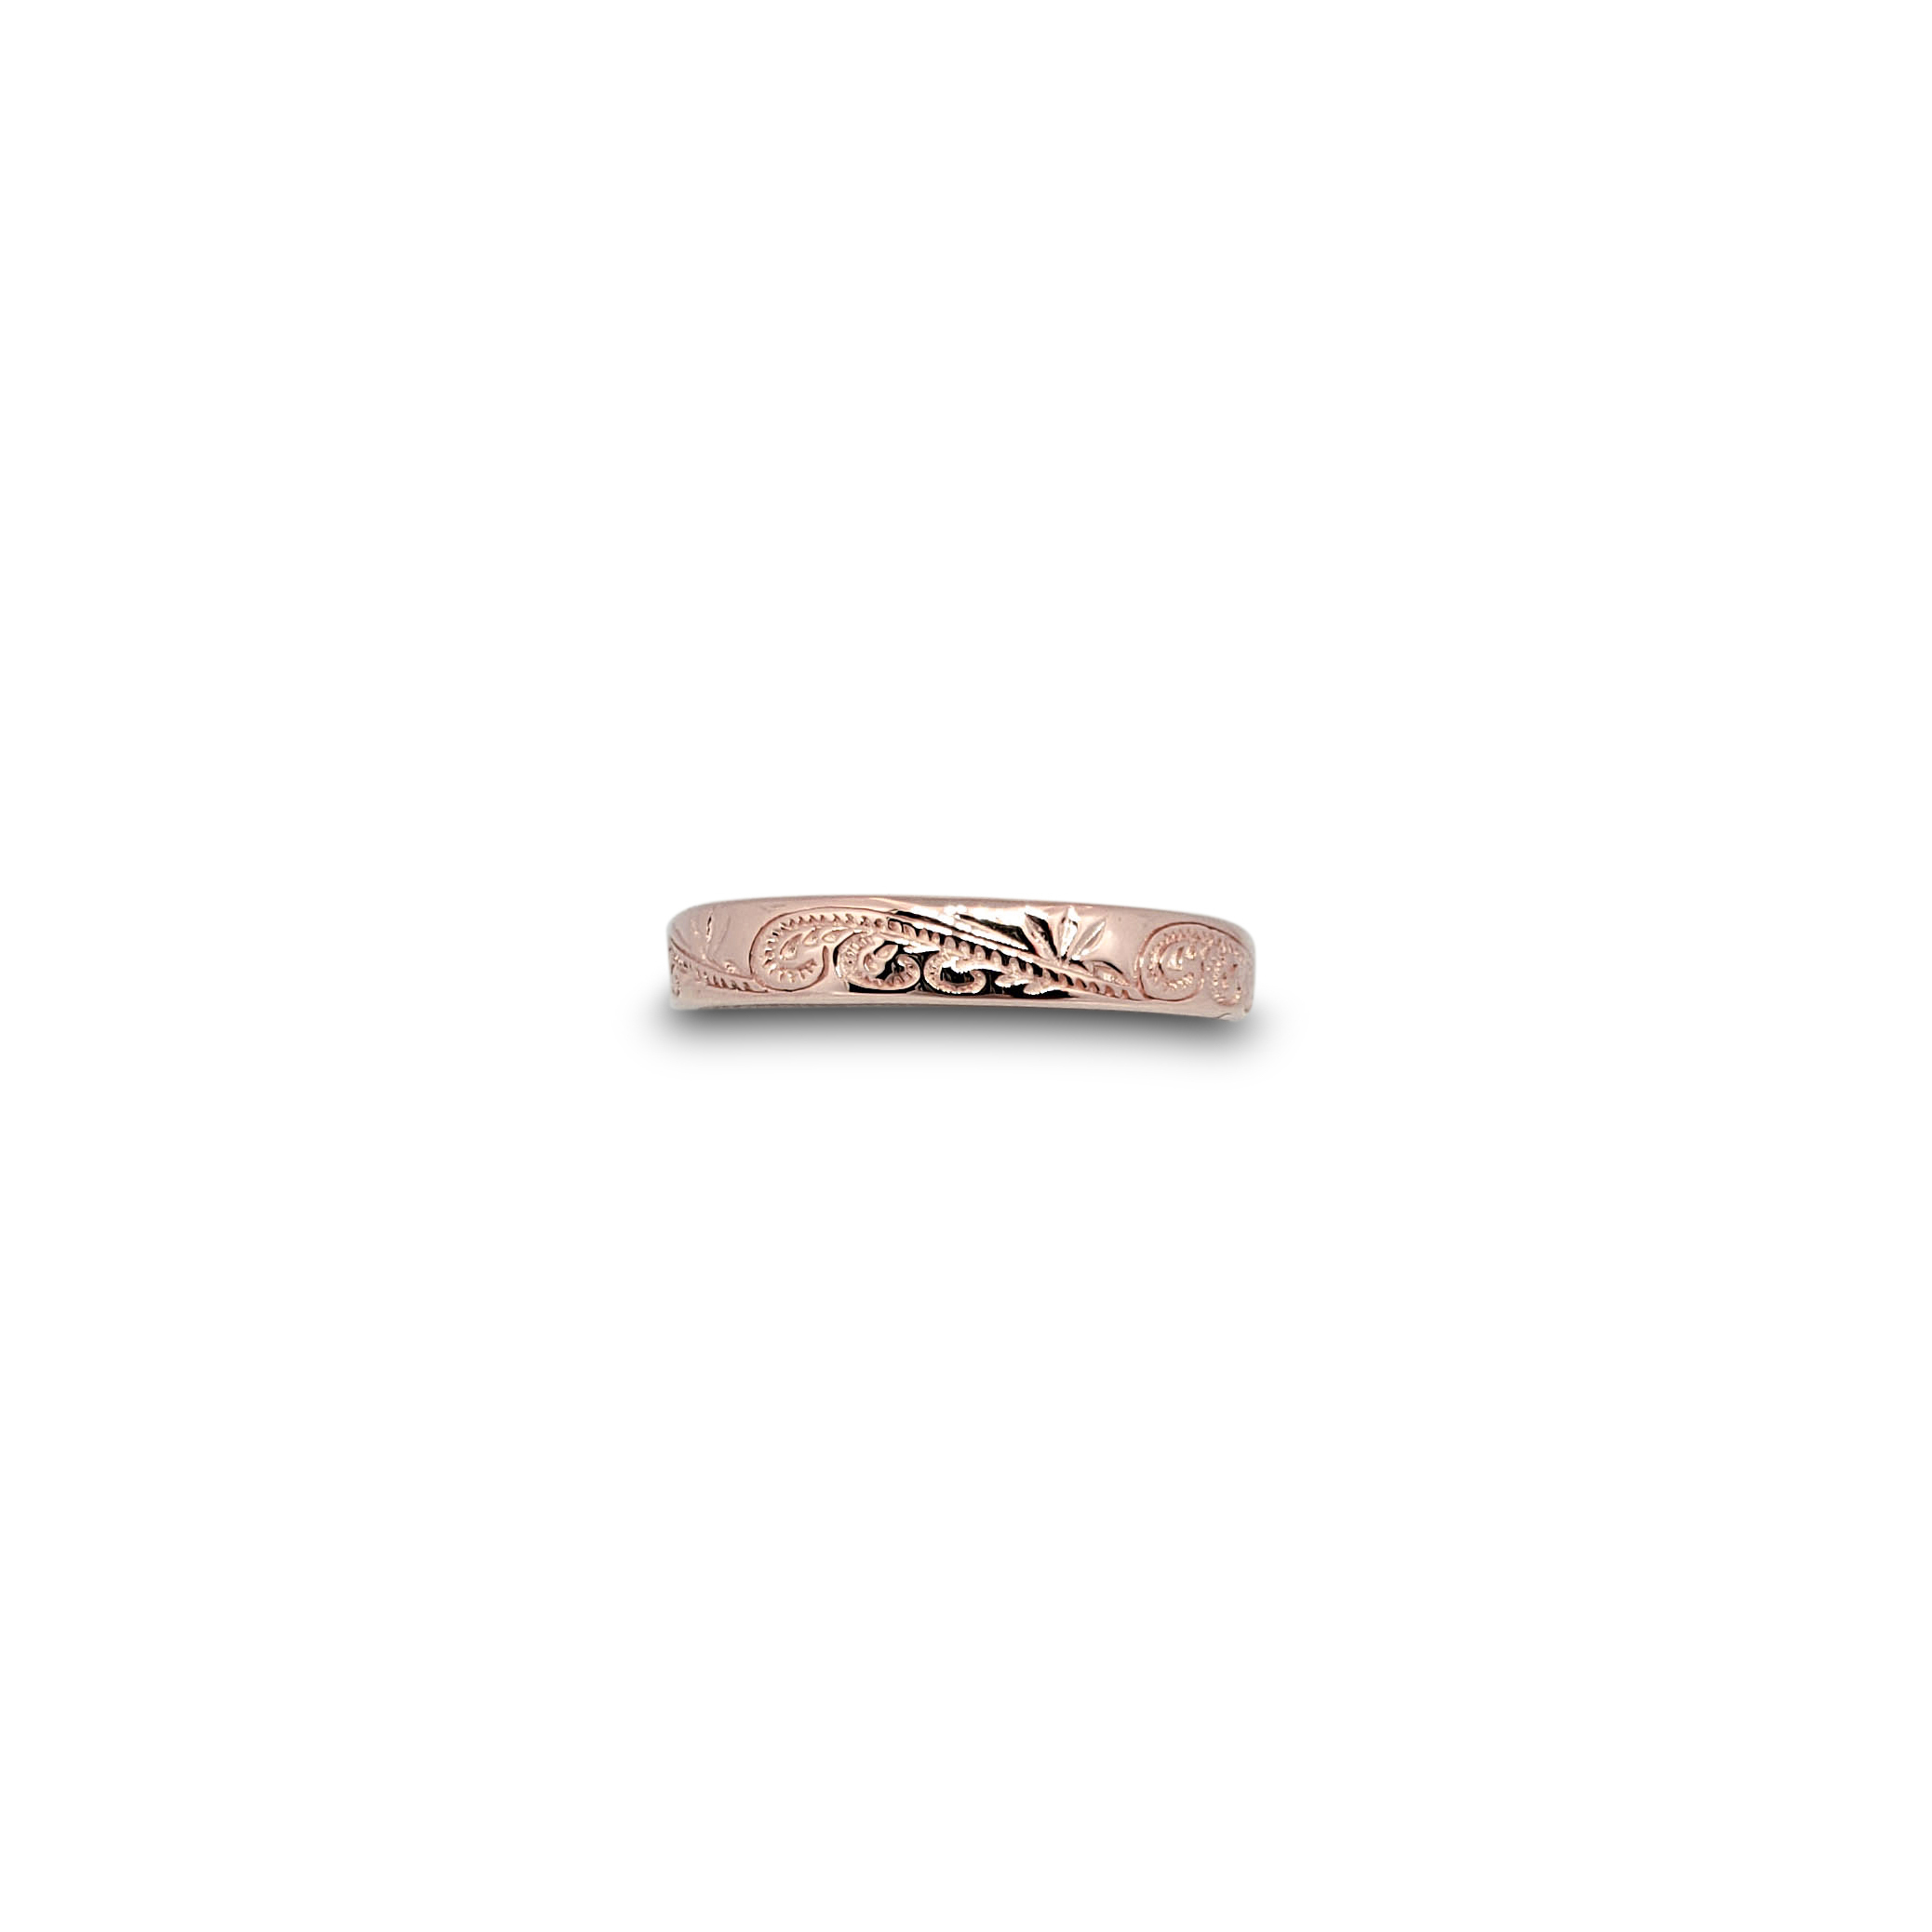 Solid 10K Women's Rose Gold Ring Engraved Hawaiian Scroll Ring 4mm Size 1 -  12 - Jahda Jewelry Company Custom Gold Rings, Necklaces, Bracelets   Earrings - Sacramento, California